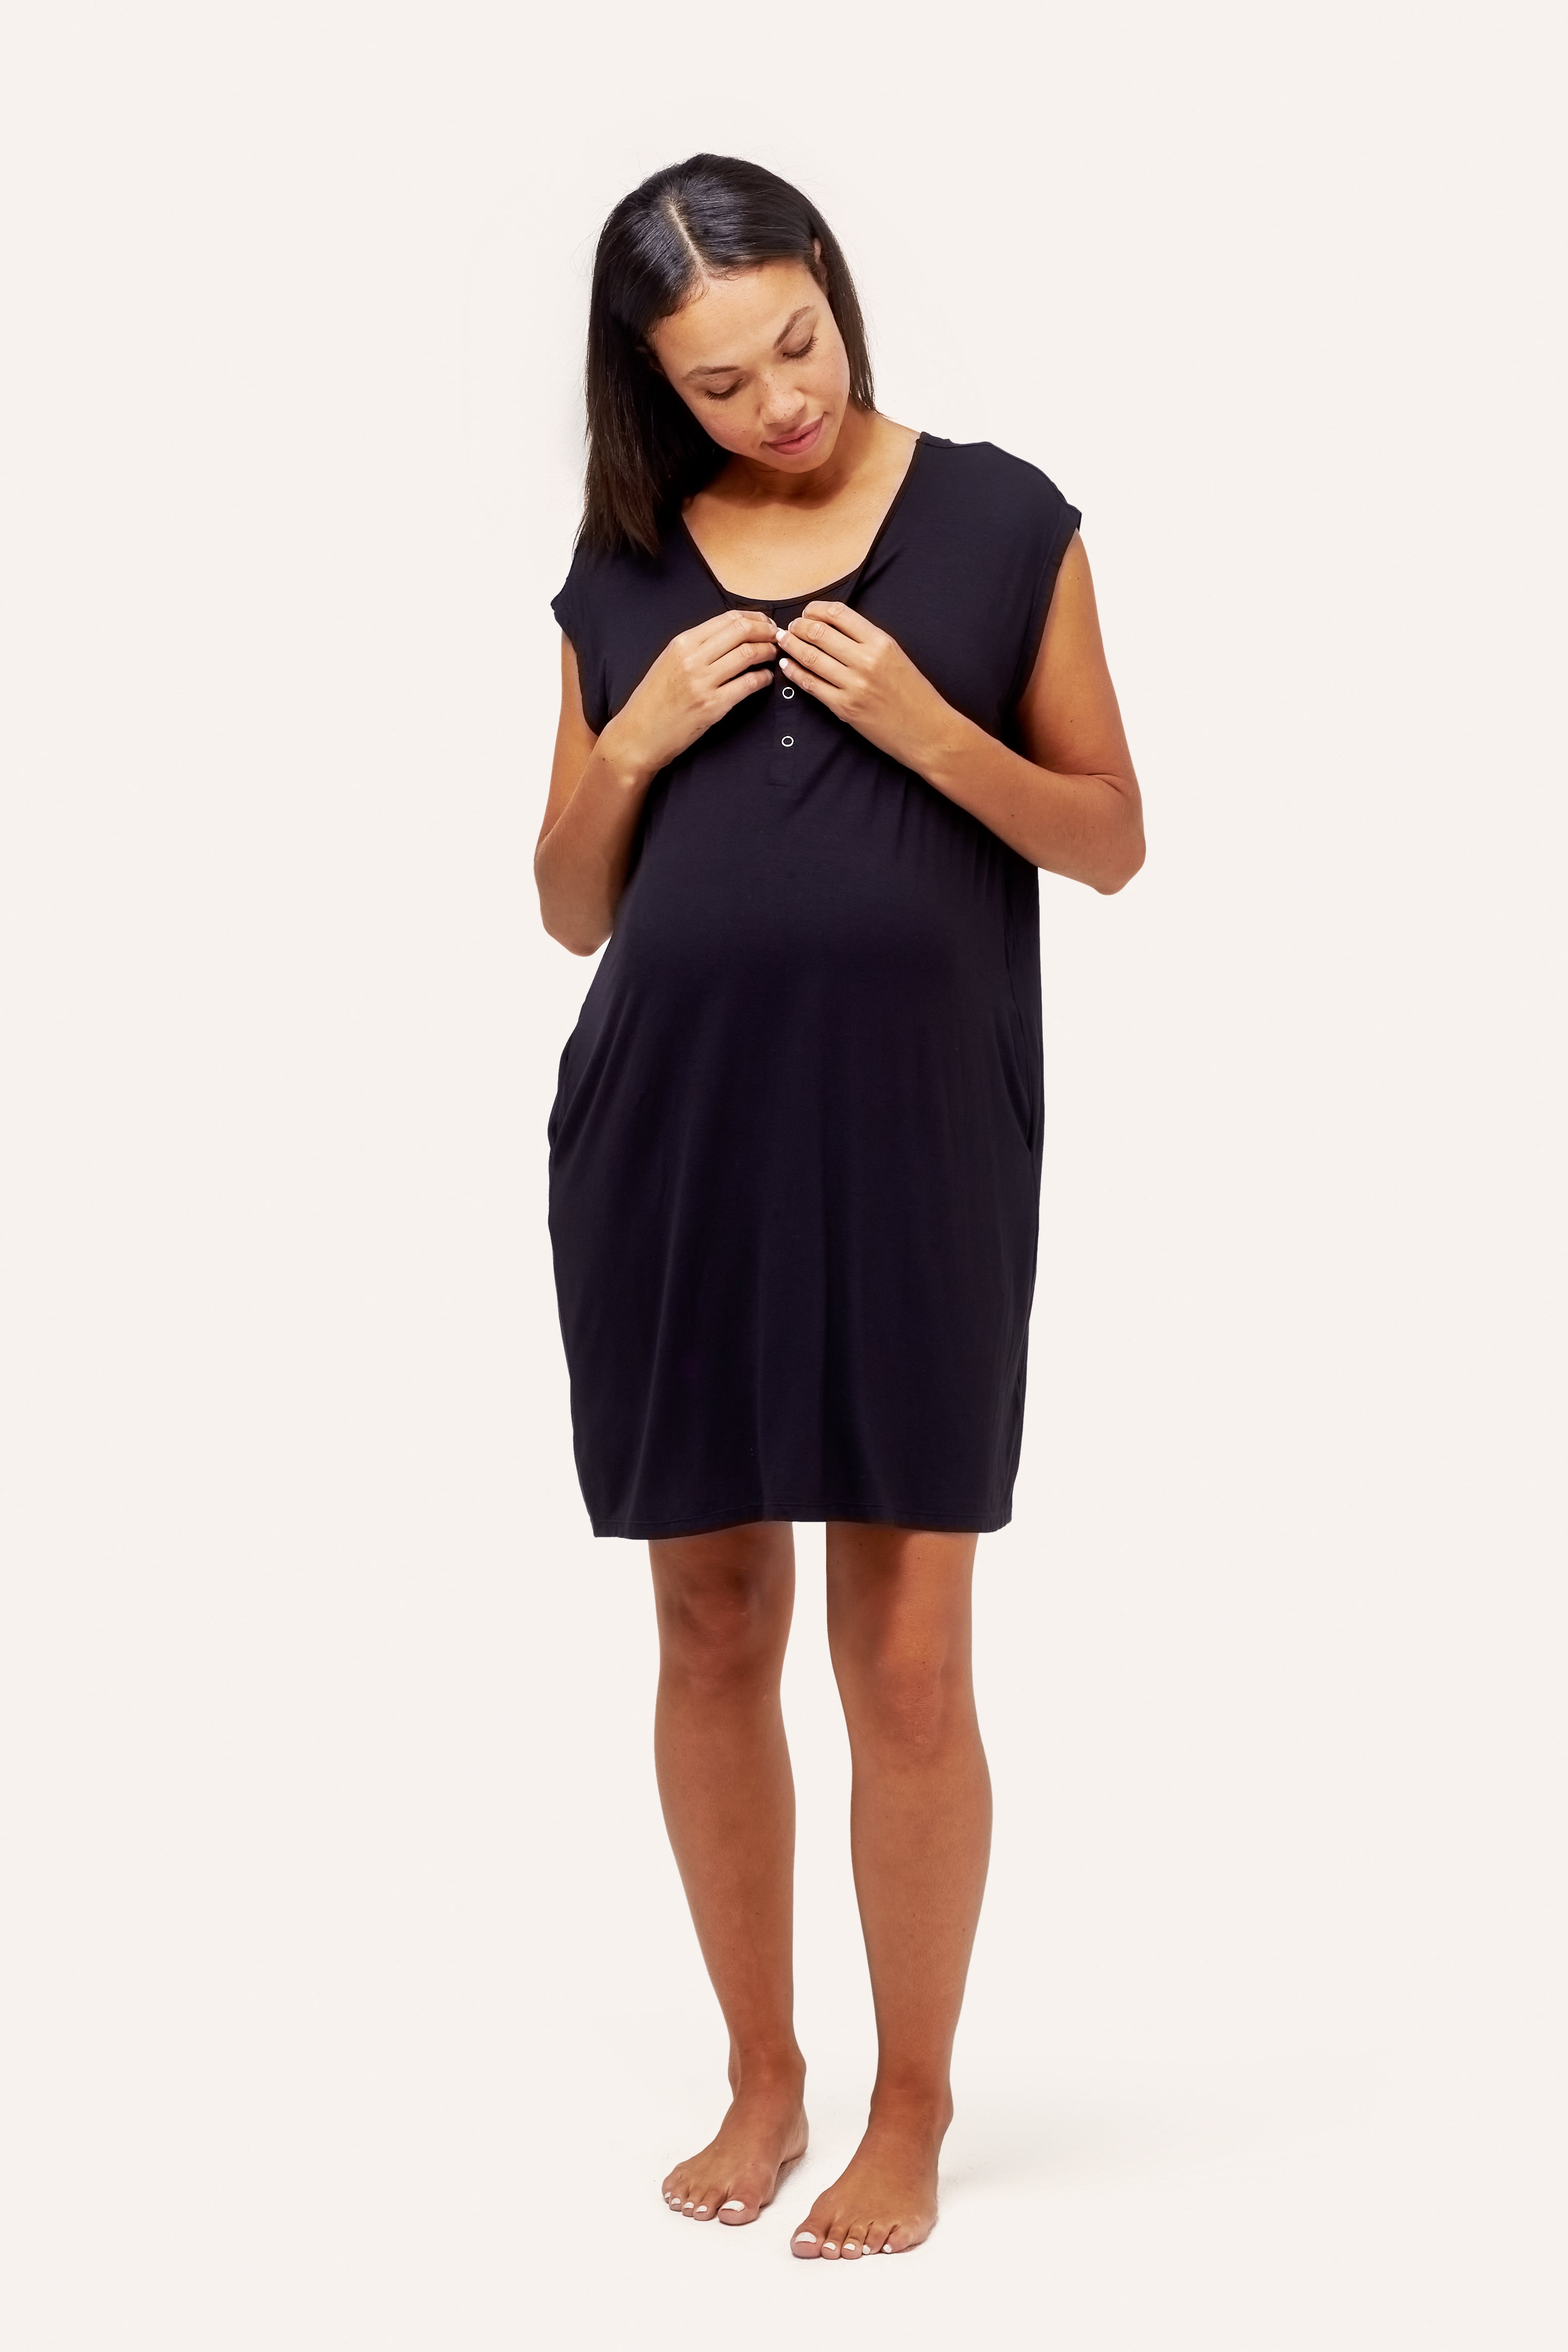 Maternity Nursing Nightgown at best price in Ernakulam by Jewish